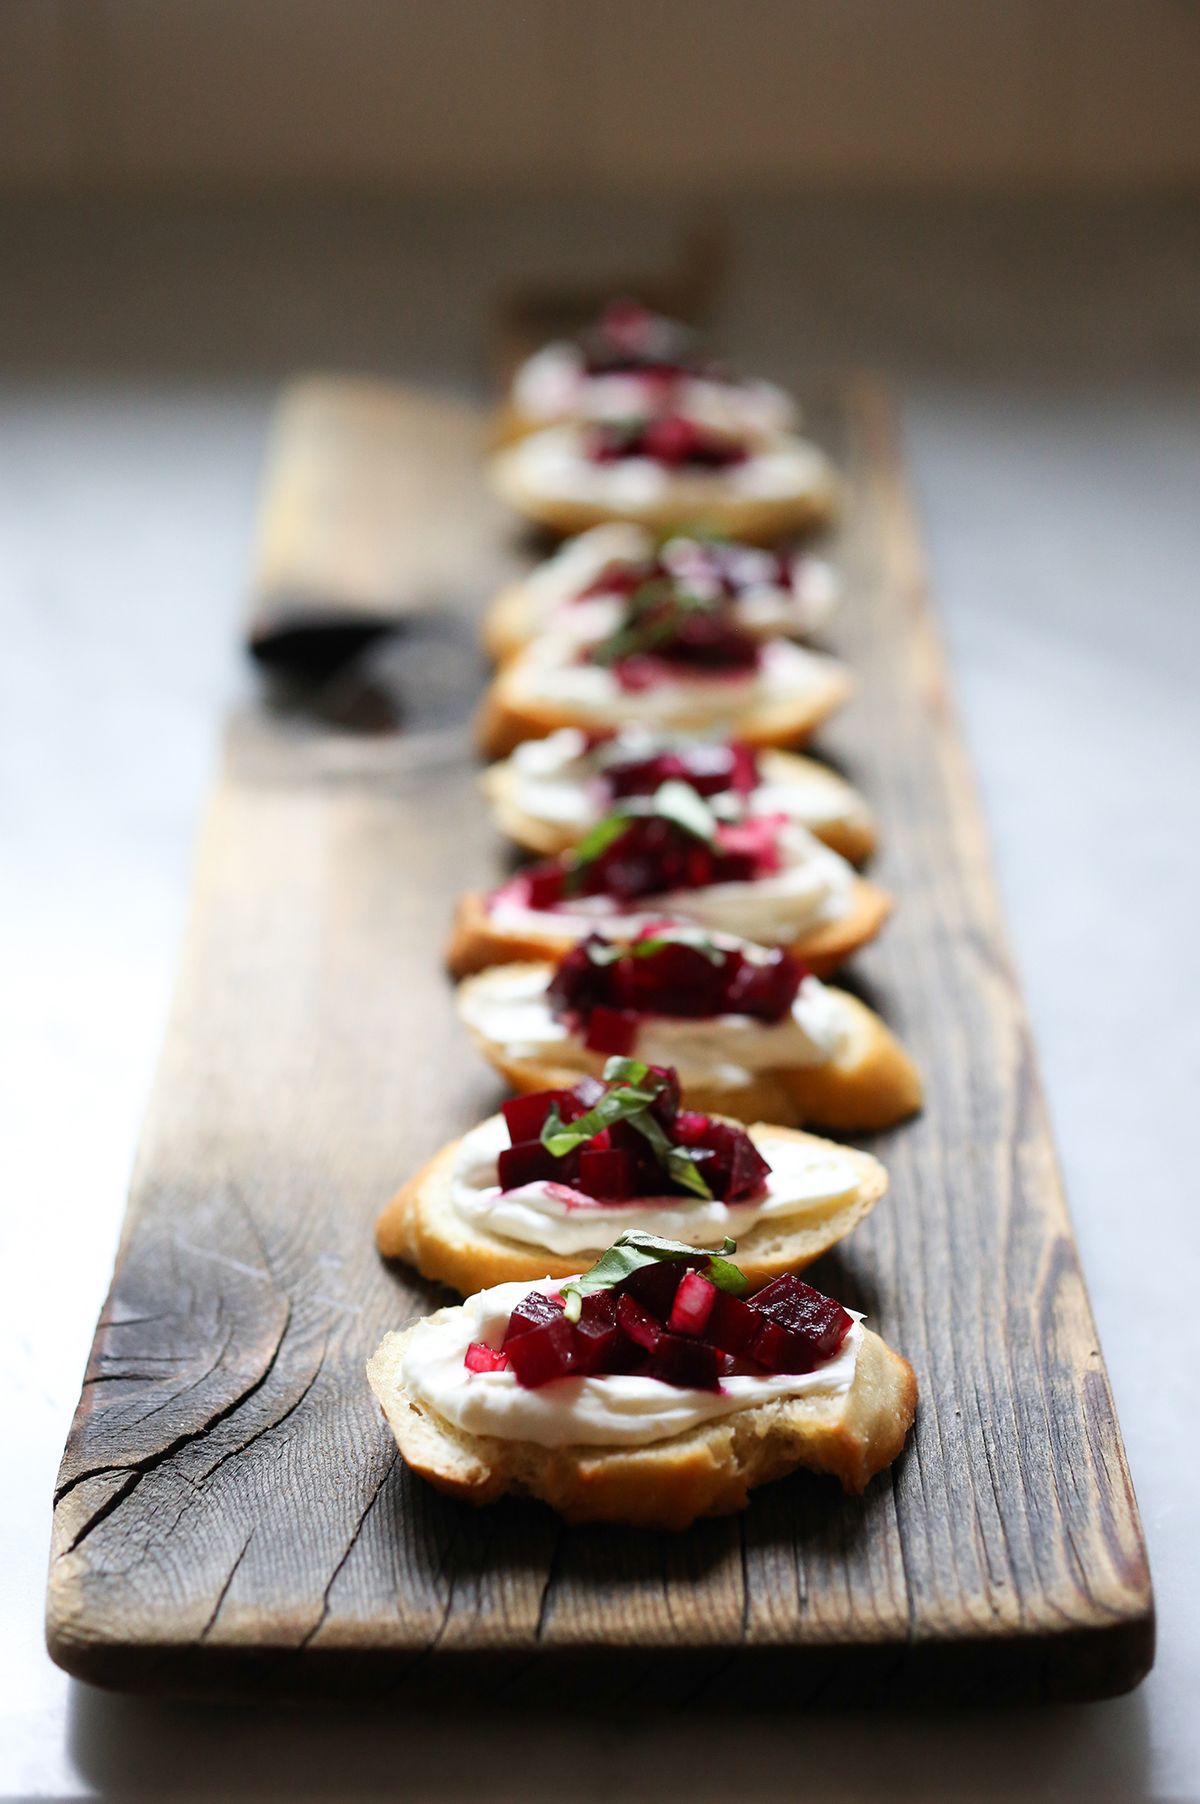 Beet bruschetta with goat cheese and basil is a standout appetizer.